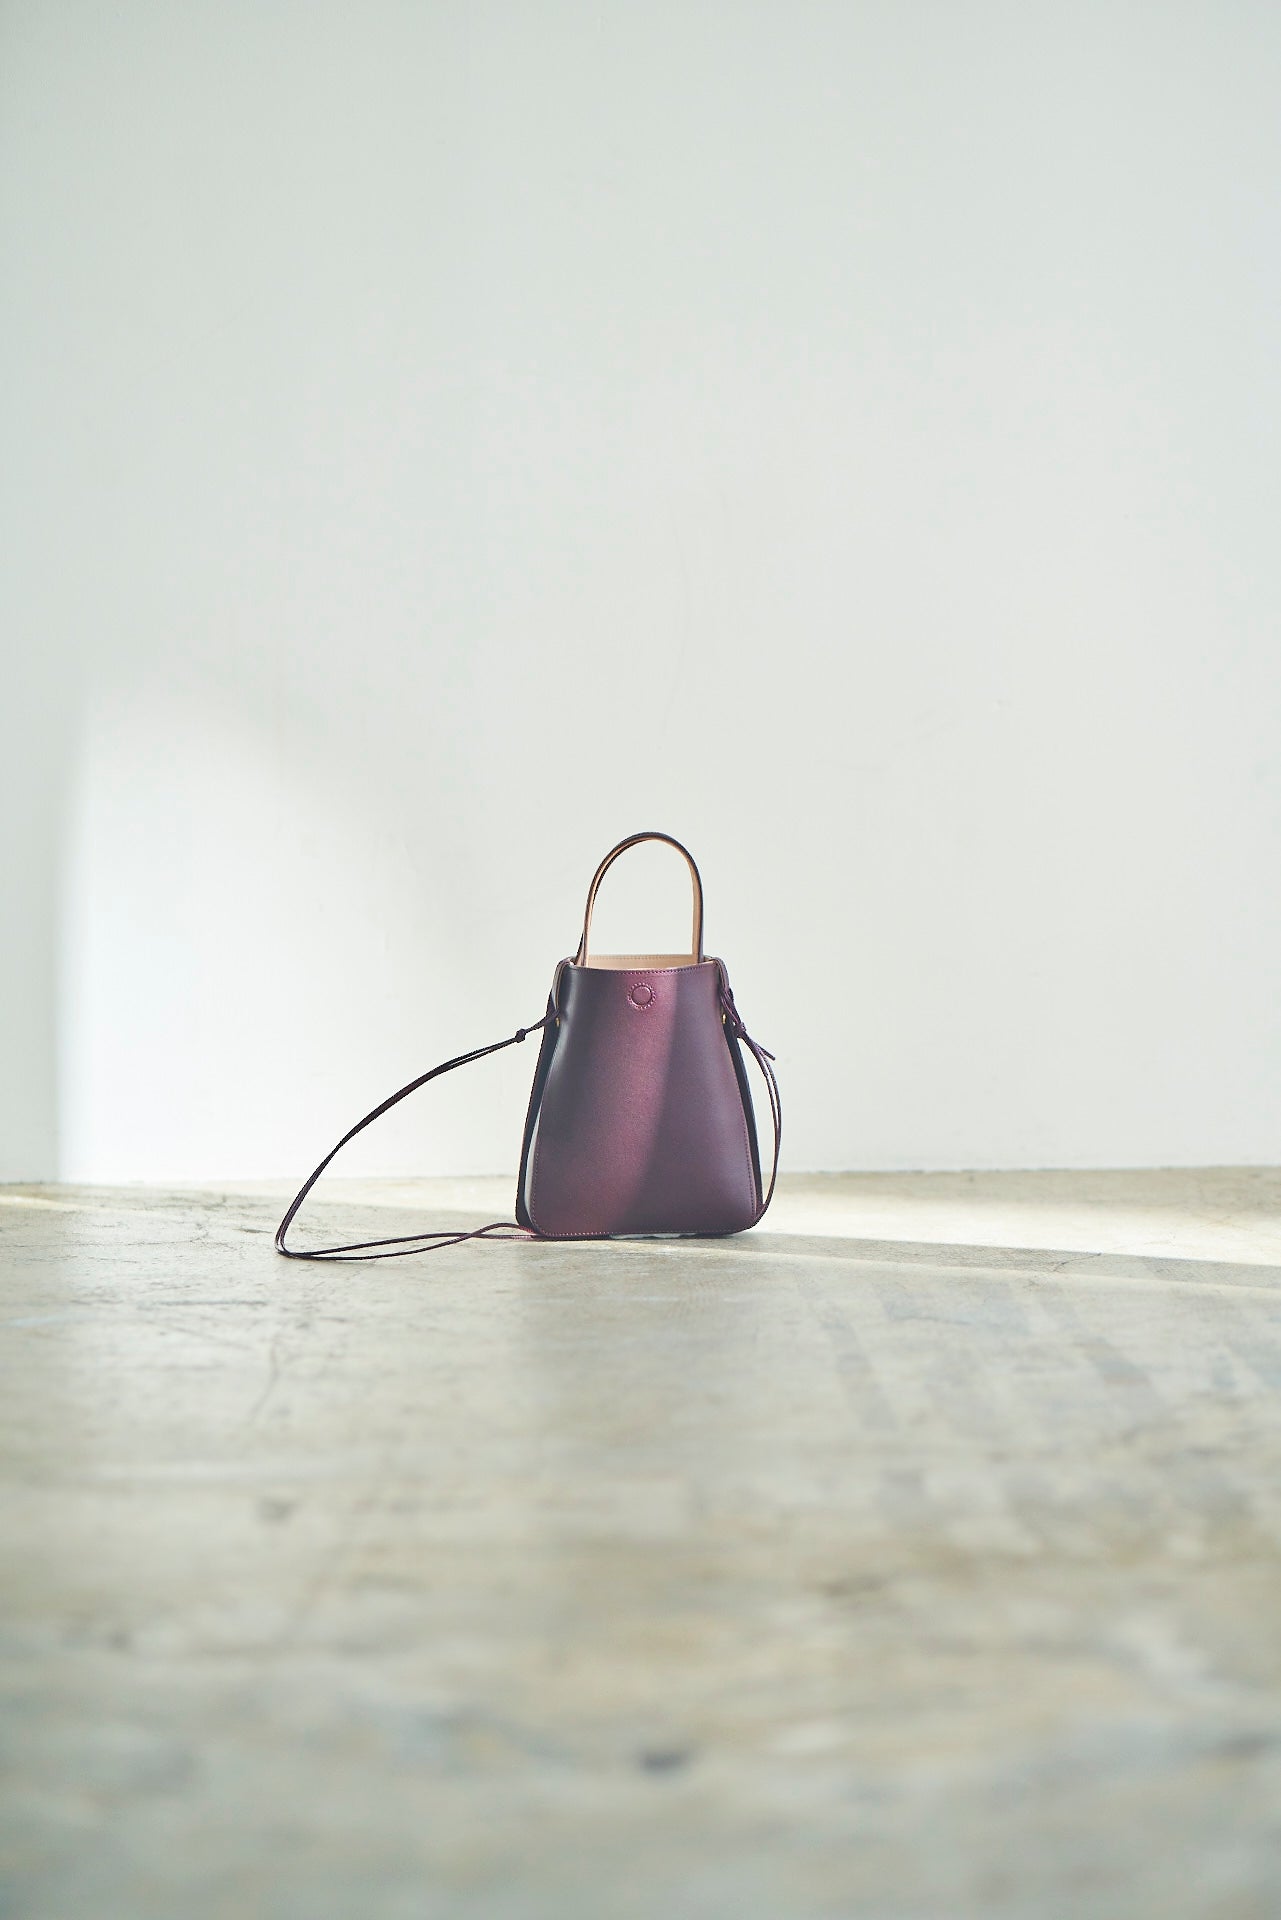 ROUNDED BOX/MULBERRY